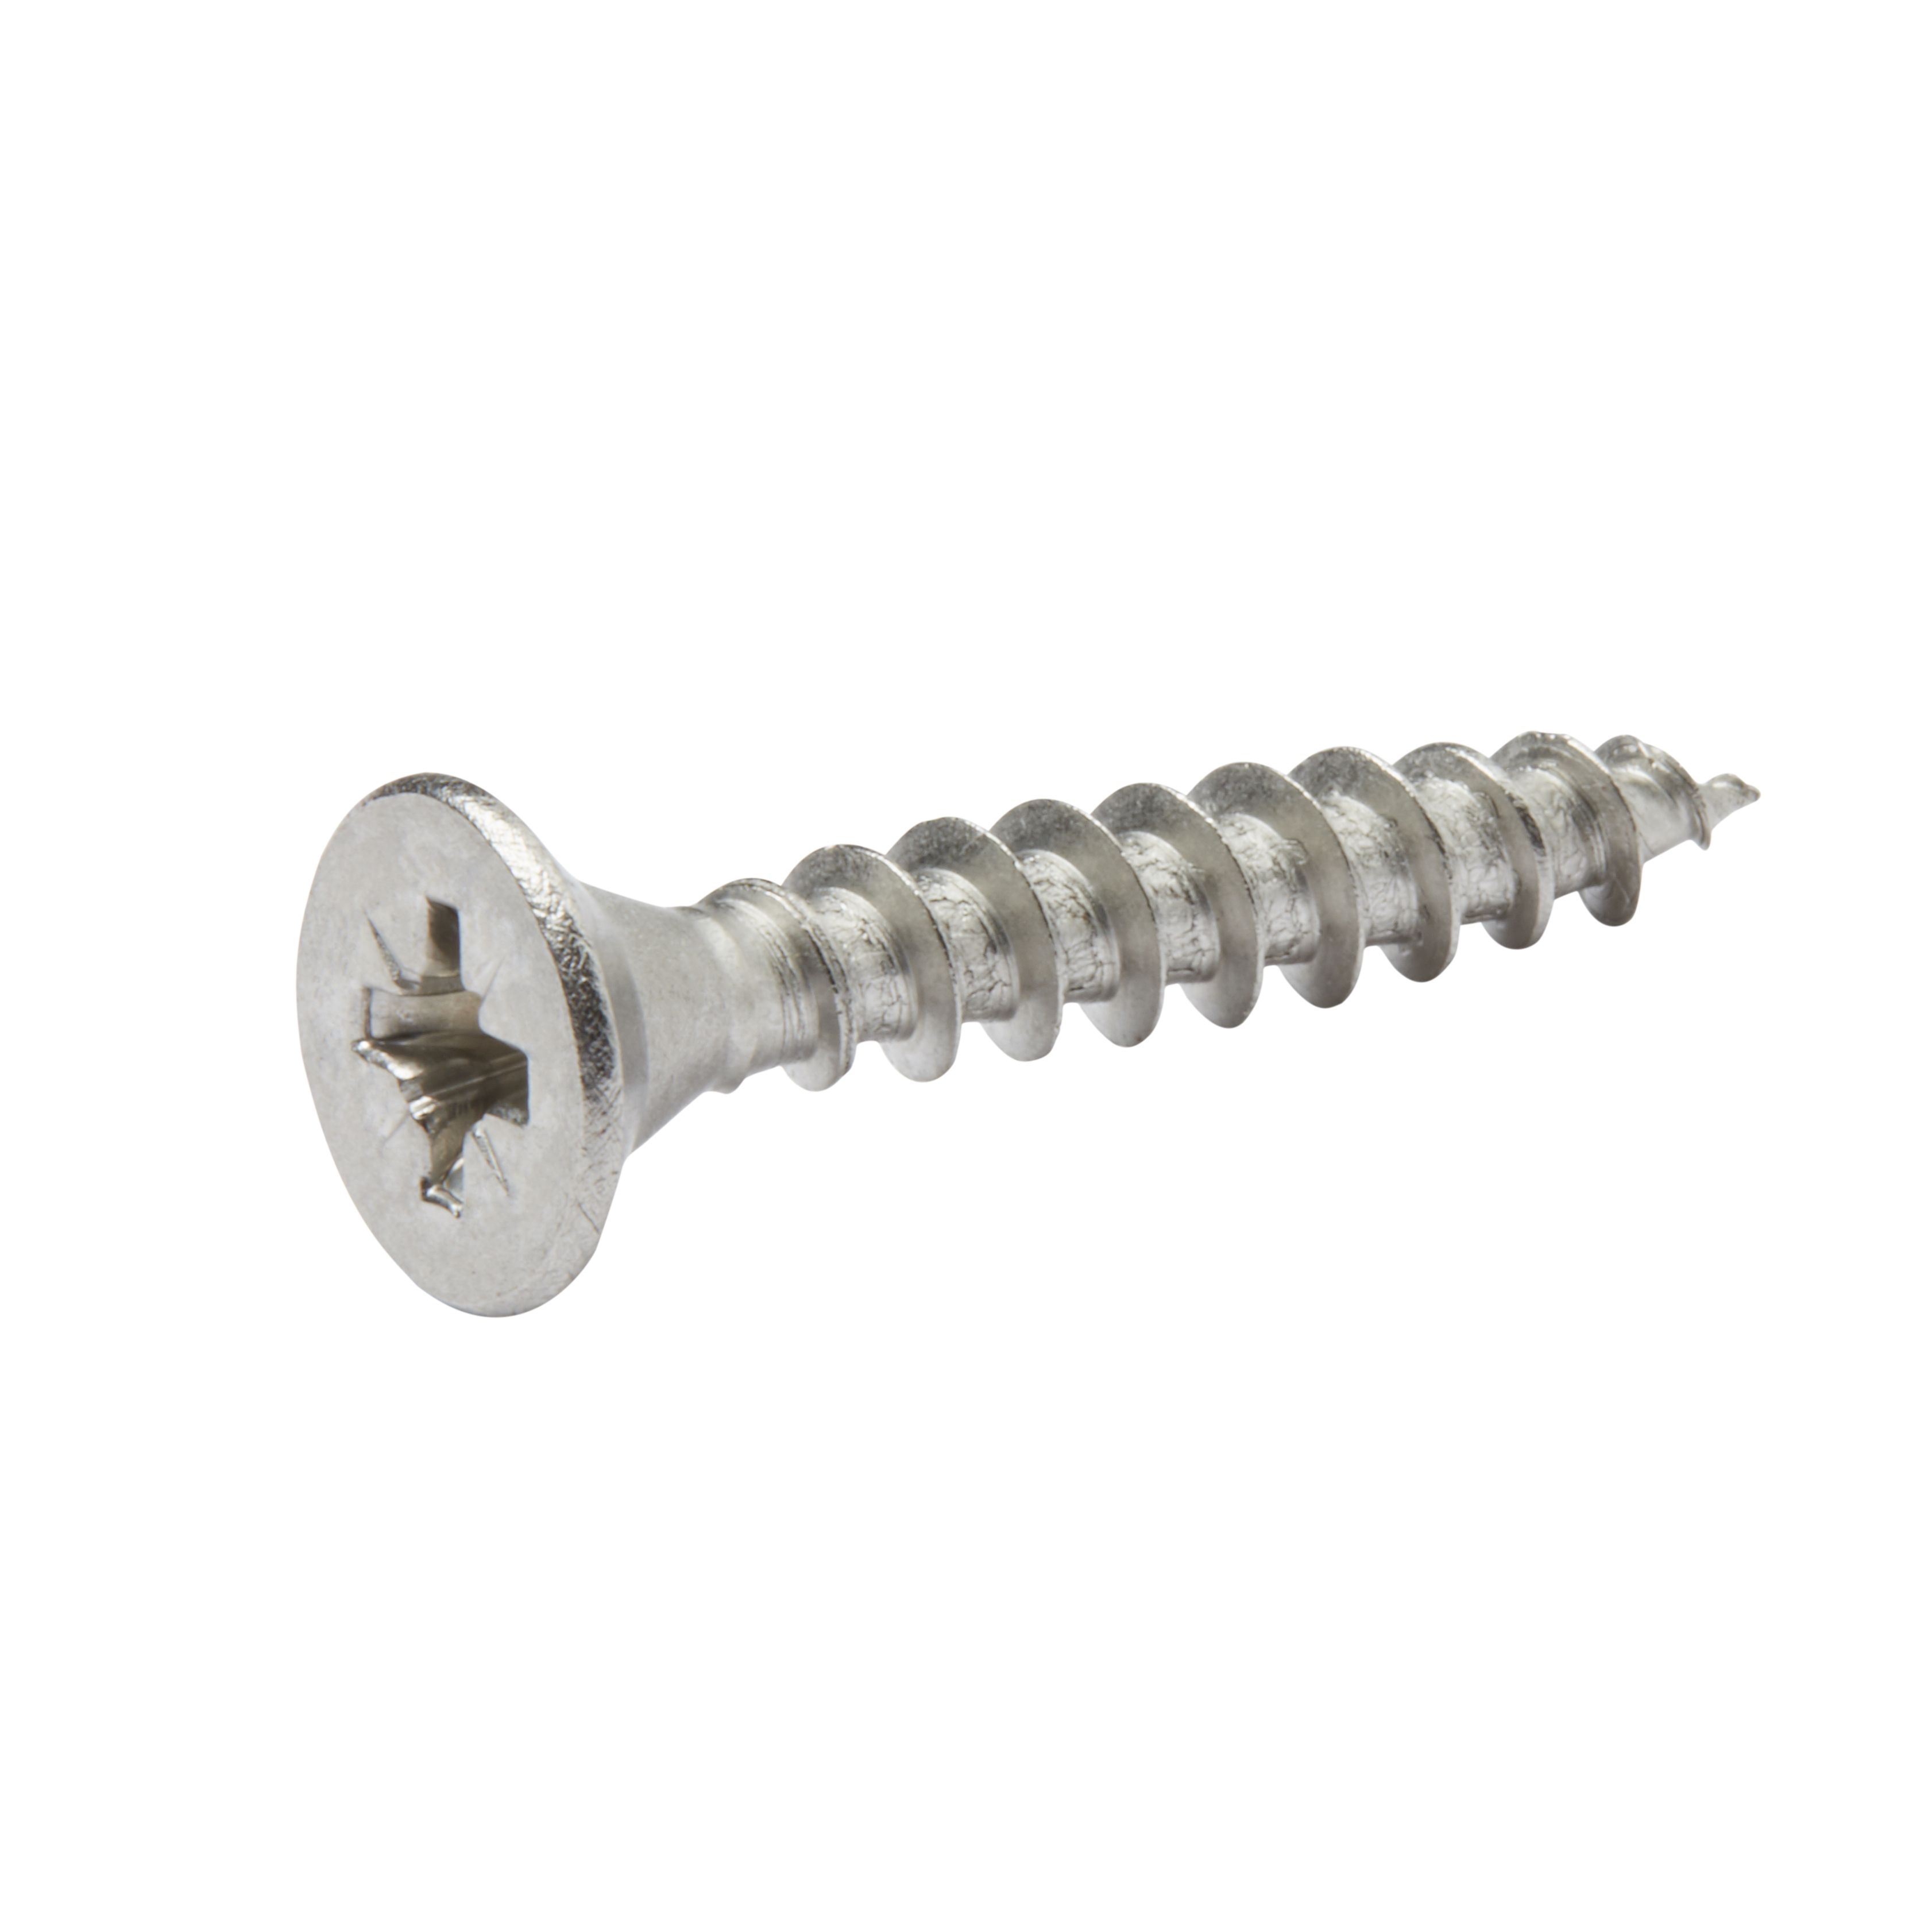 Diall Pozidriv Stainless steel Screw (Dia)5mm (L)30mm, Pack of 20